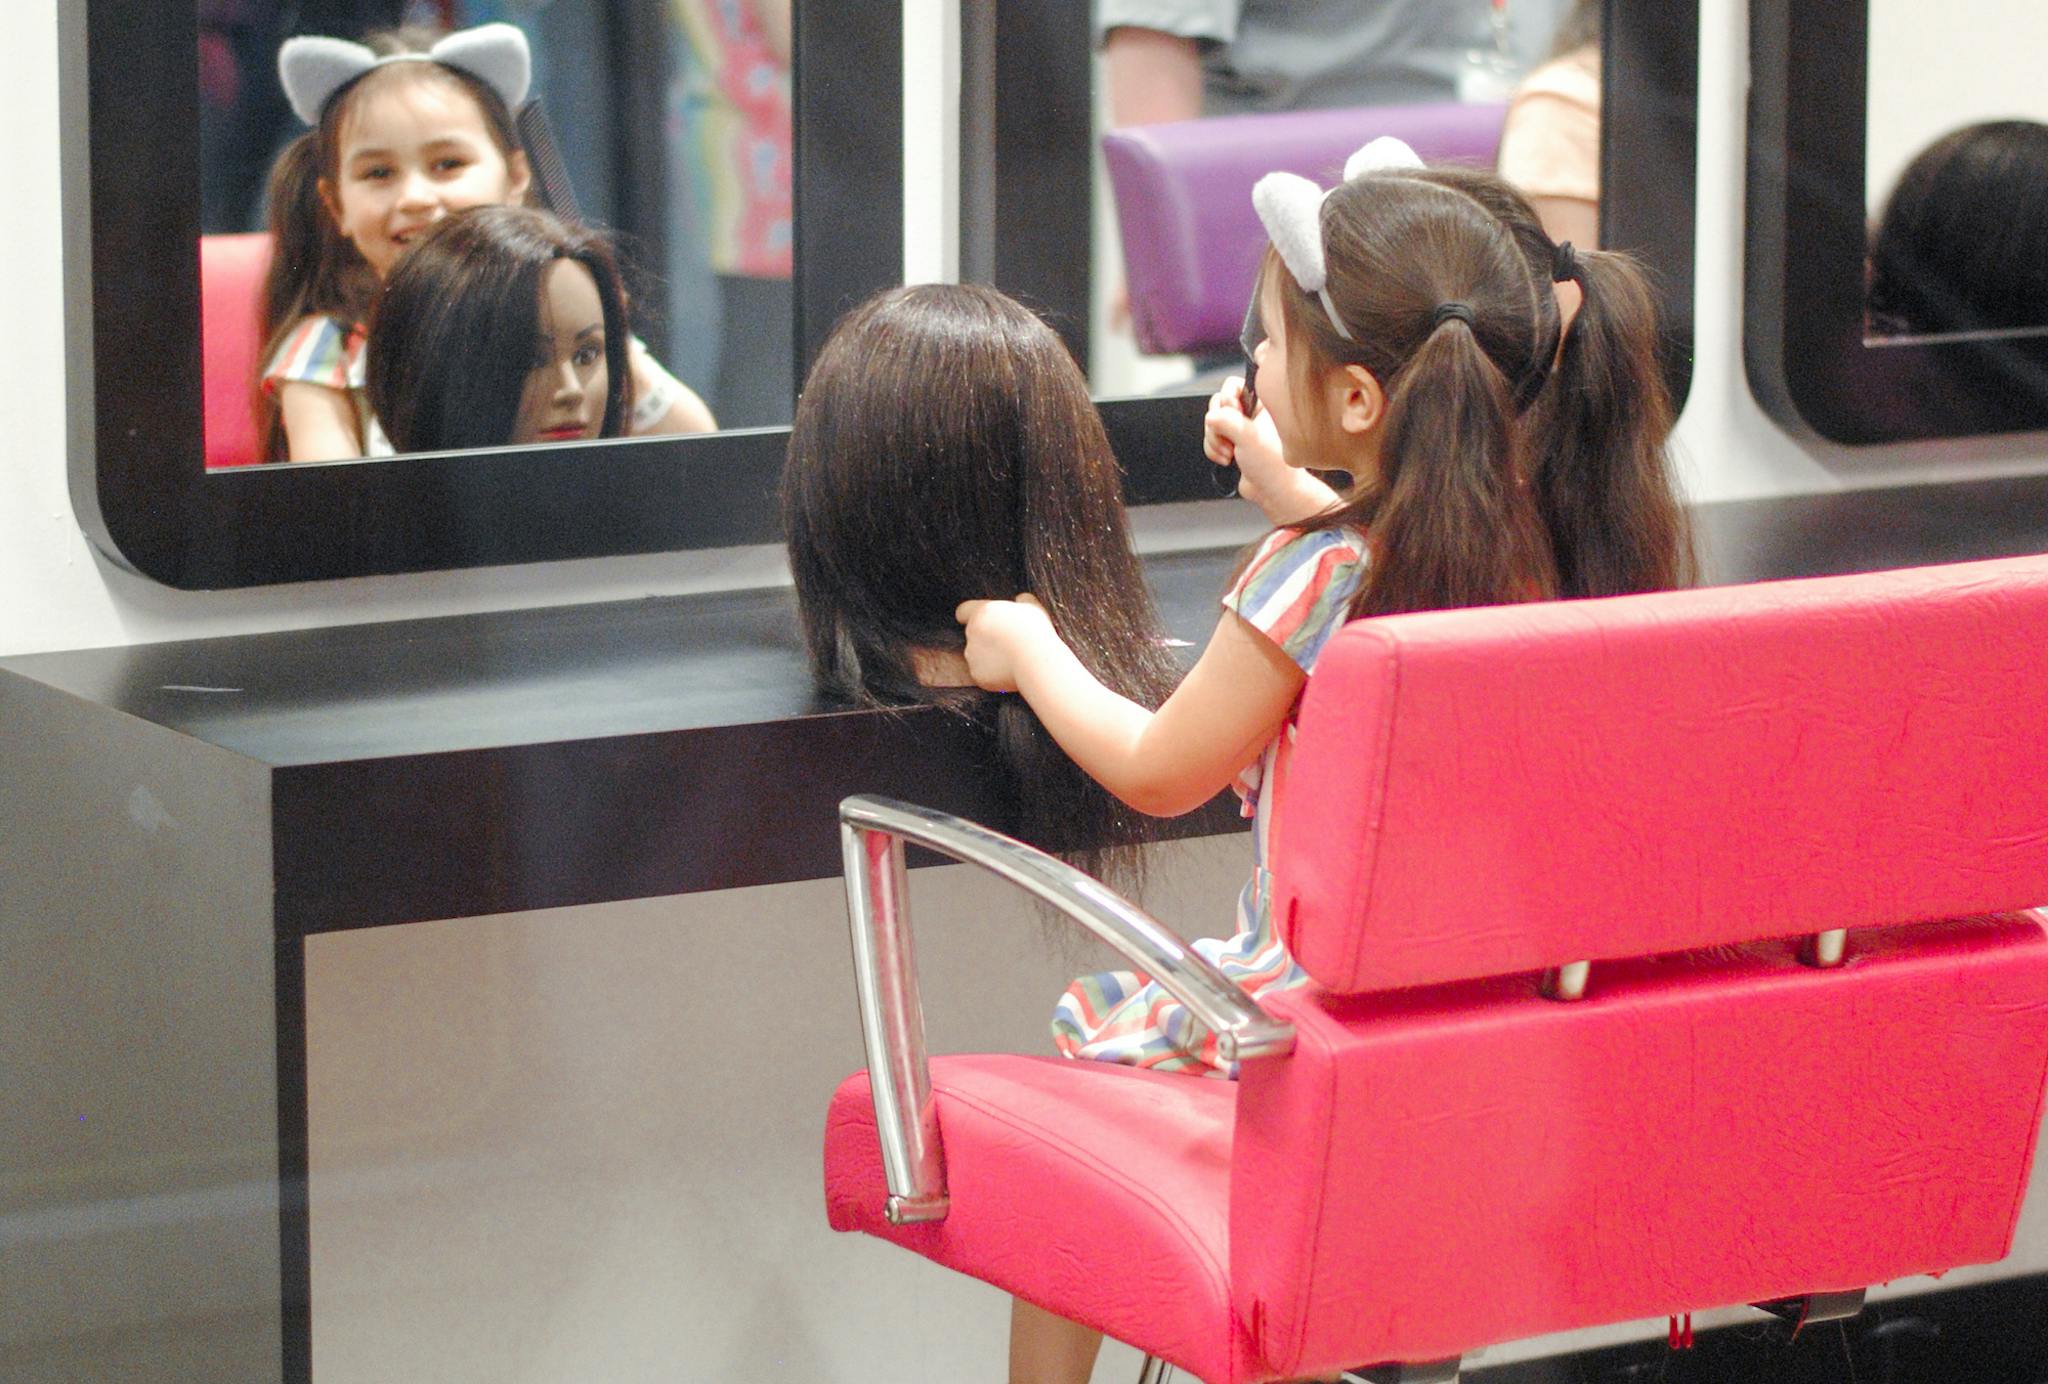 A little girl does the hair of a mannequin in a play beauty salon at Kidzania.